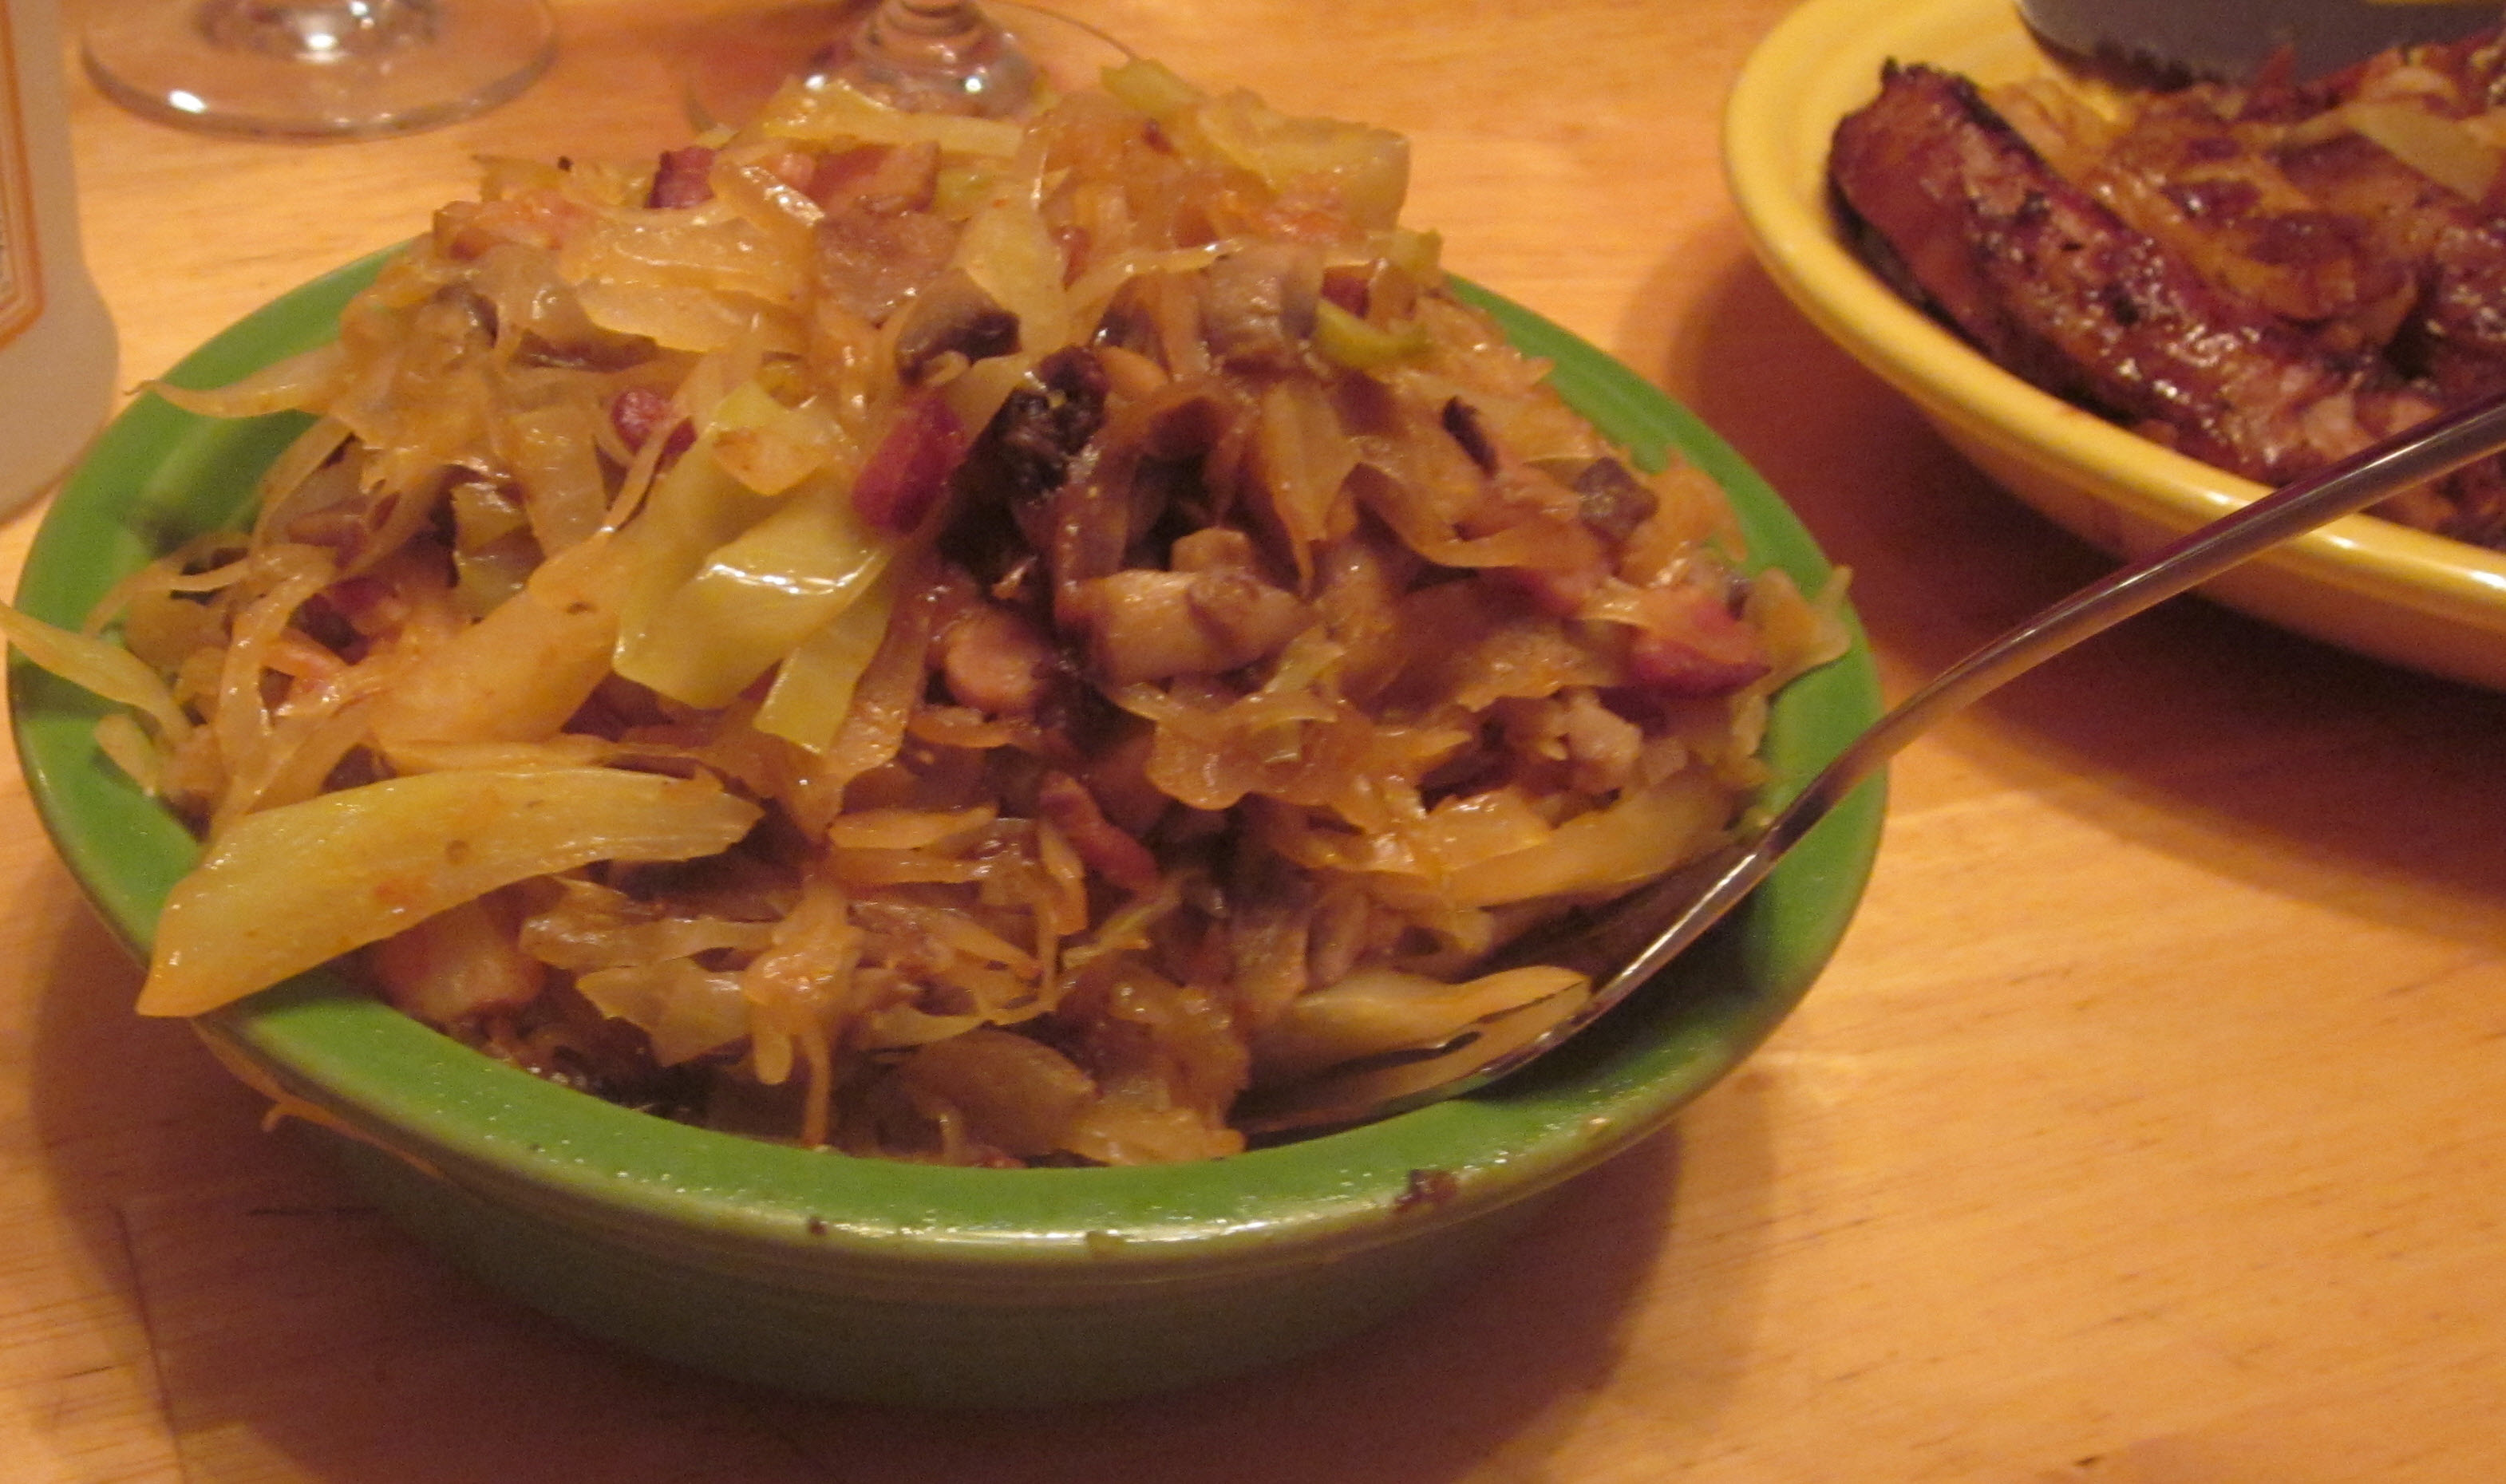 Russian-style Sauerkraut with Caraway and Mushrooms